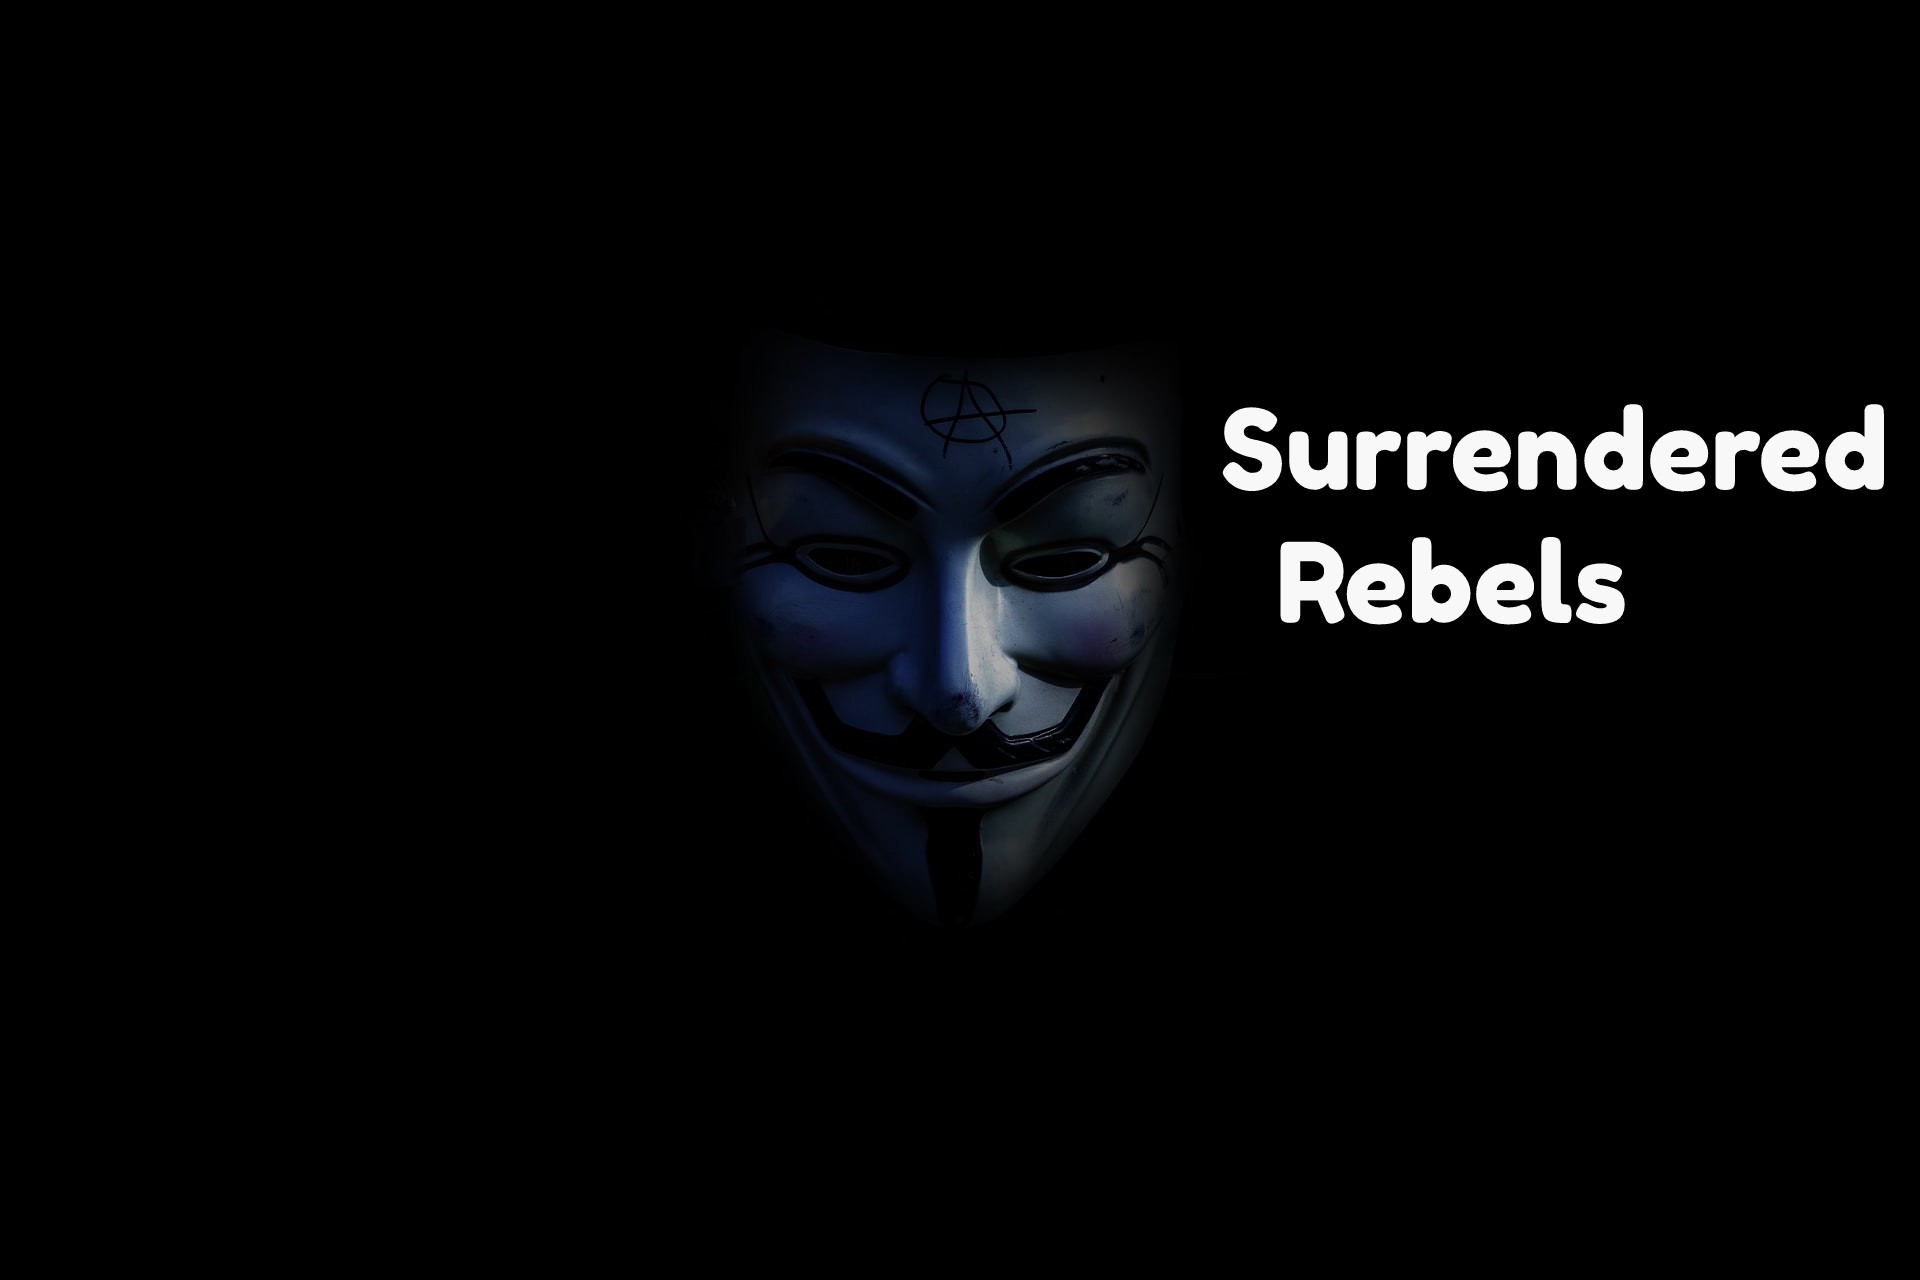 It’s the surrendered rebels that cause the downfall of a society